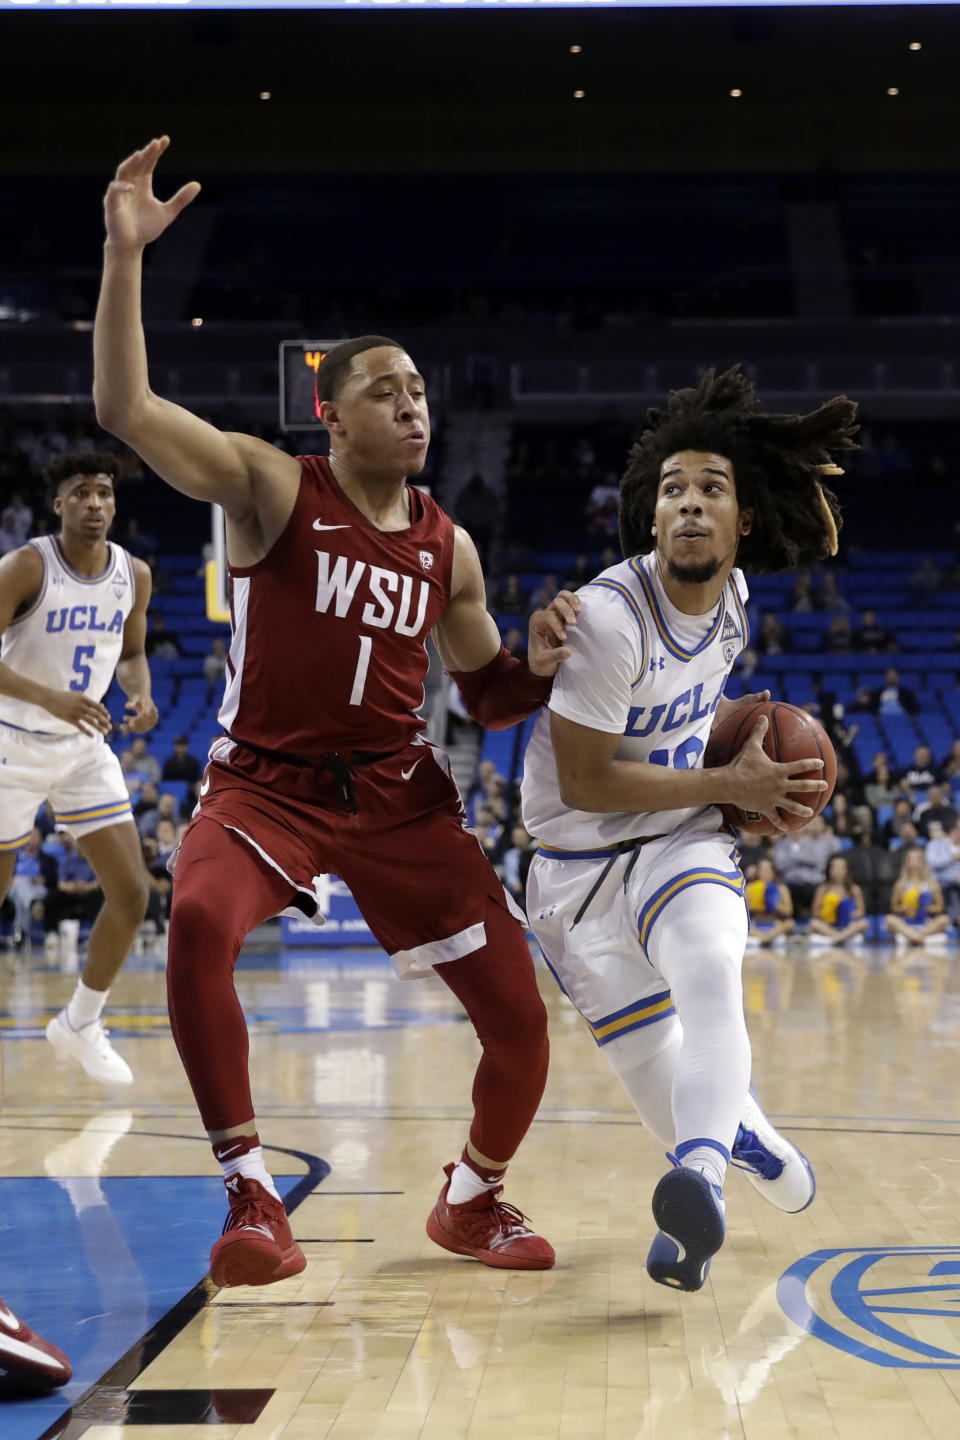 UCLA guard Tyger Campbell, right, is defended by Washington State guard Jervae Robinson (1) during the first half of an NCAA college basketball game Thursday, Feb. 13, 2020, in Los Angeles. (AP Photo/Marcio Jose Sanchez)